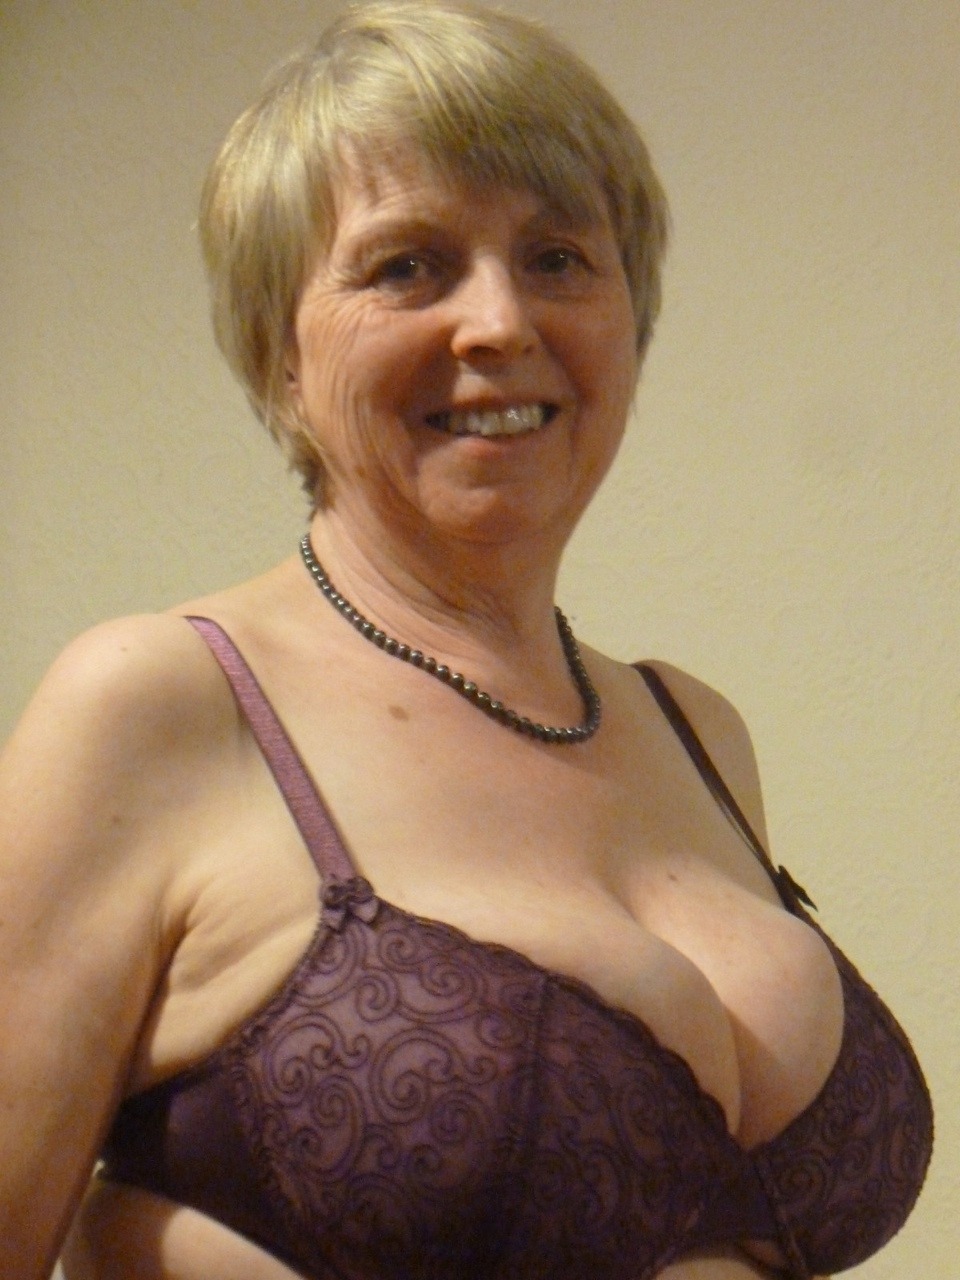 Mature Women With Big Breasts 24